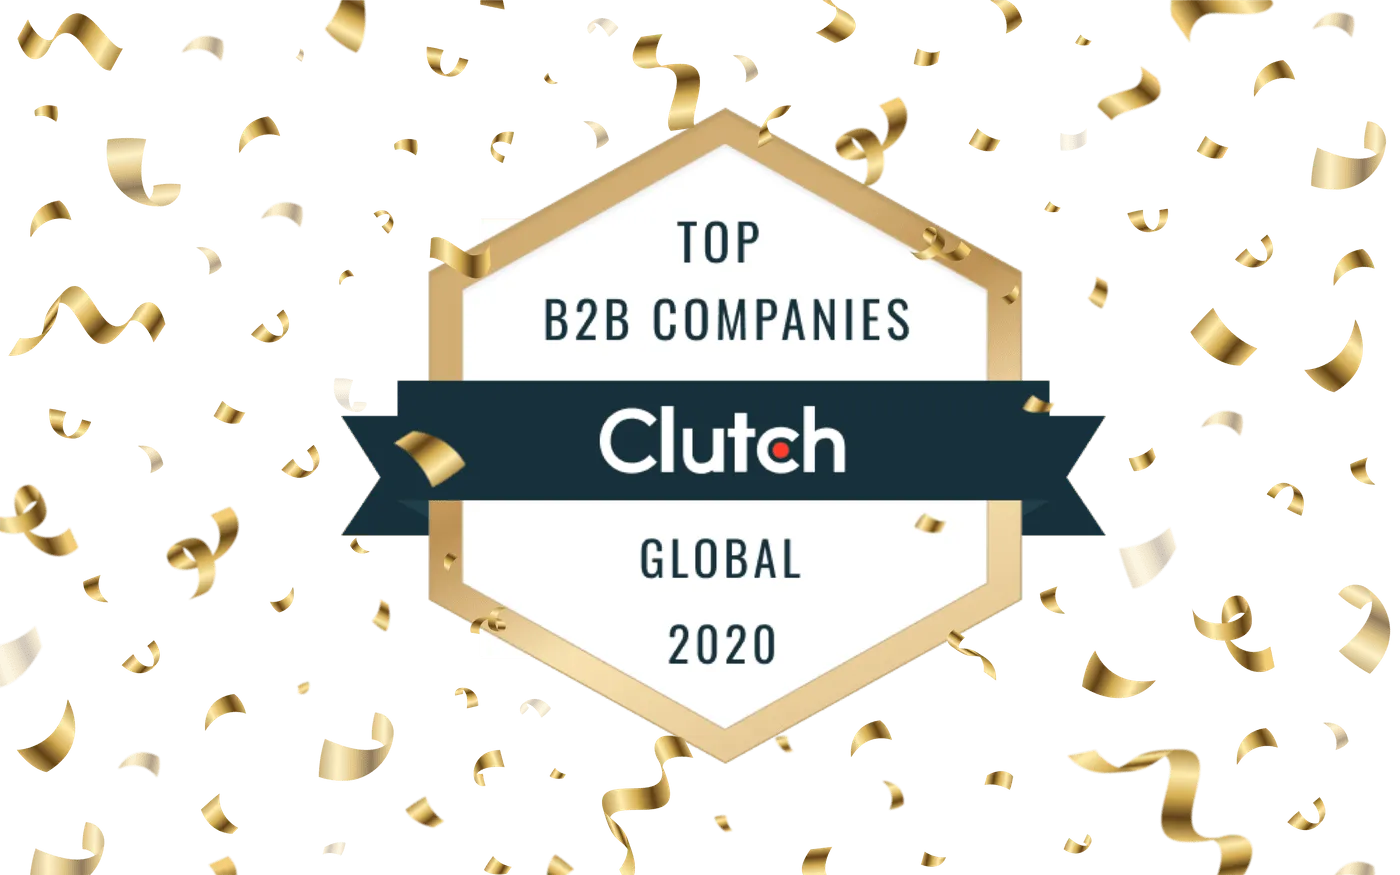 Clutch ranked Cleveroad among top 1000 companies